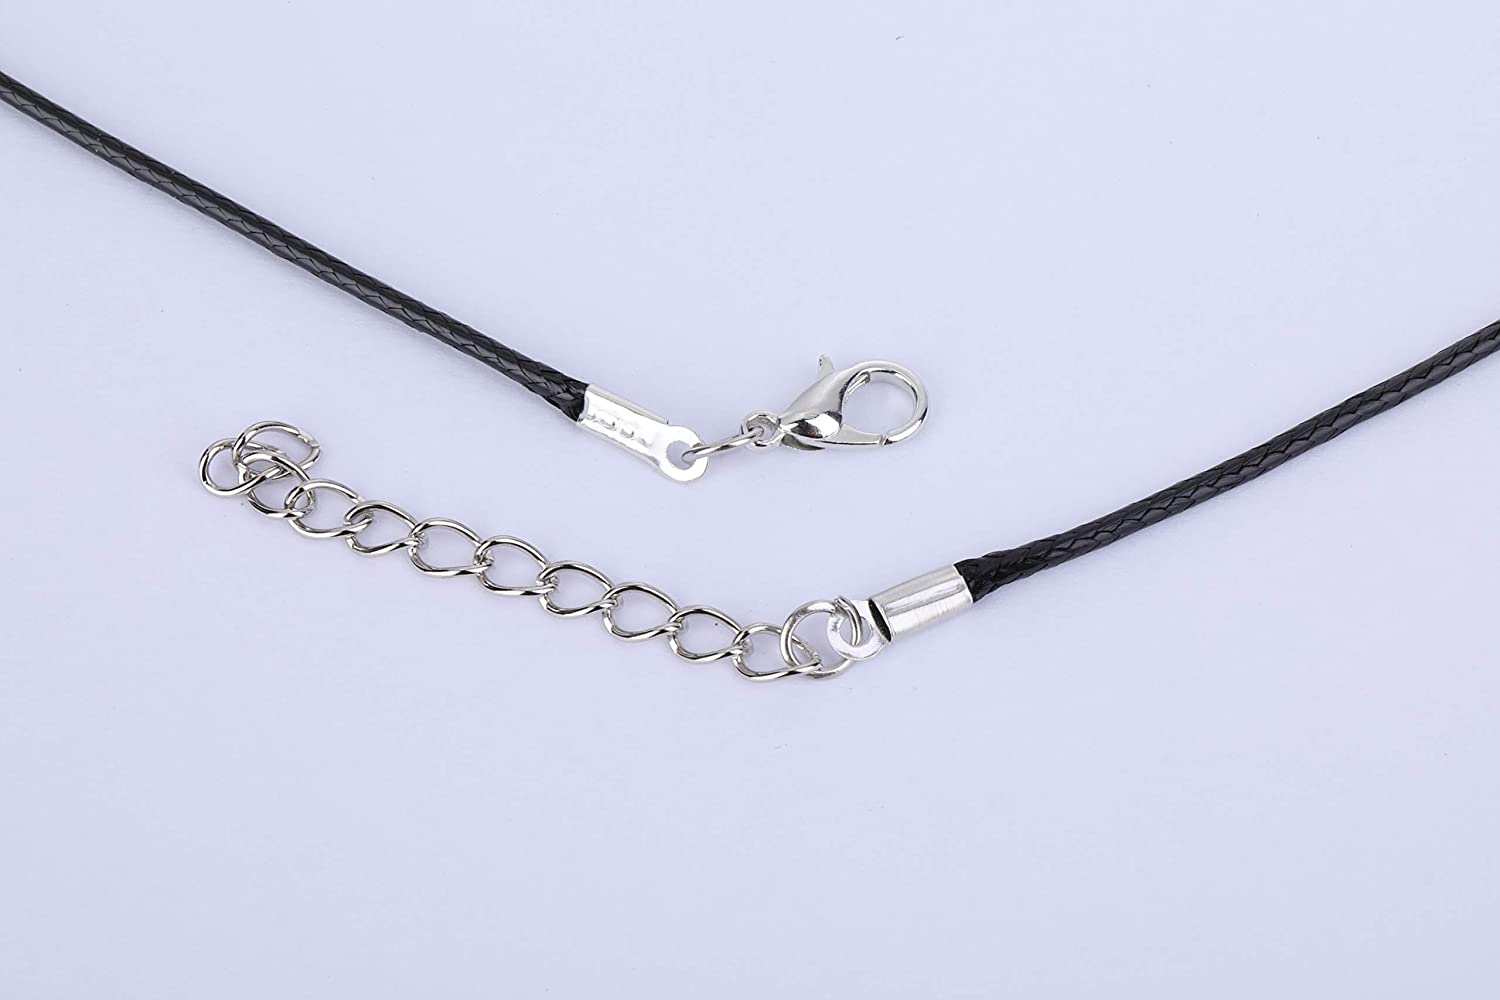 100Pcs Black Waxed Necklace Cord Bulk Chain with Clasp for Jewelry